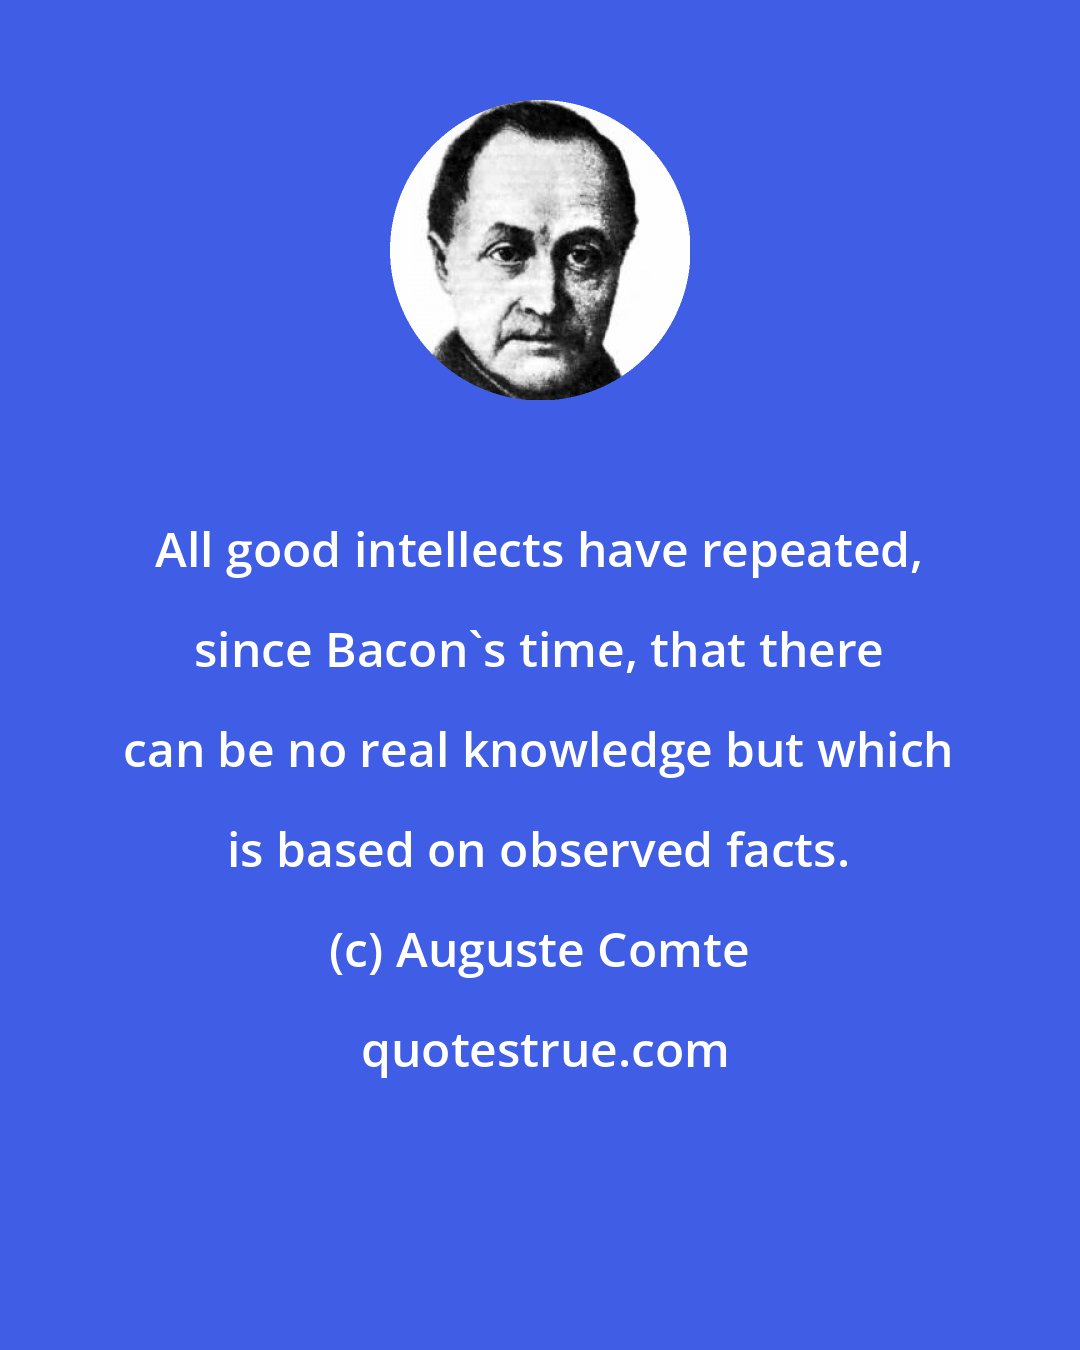 Auguste Comte: All good intellects have repeated, since Bacon's time, that there can be no real knowledge but which is based on observed facts.